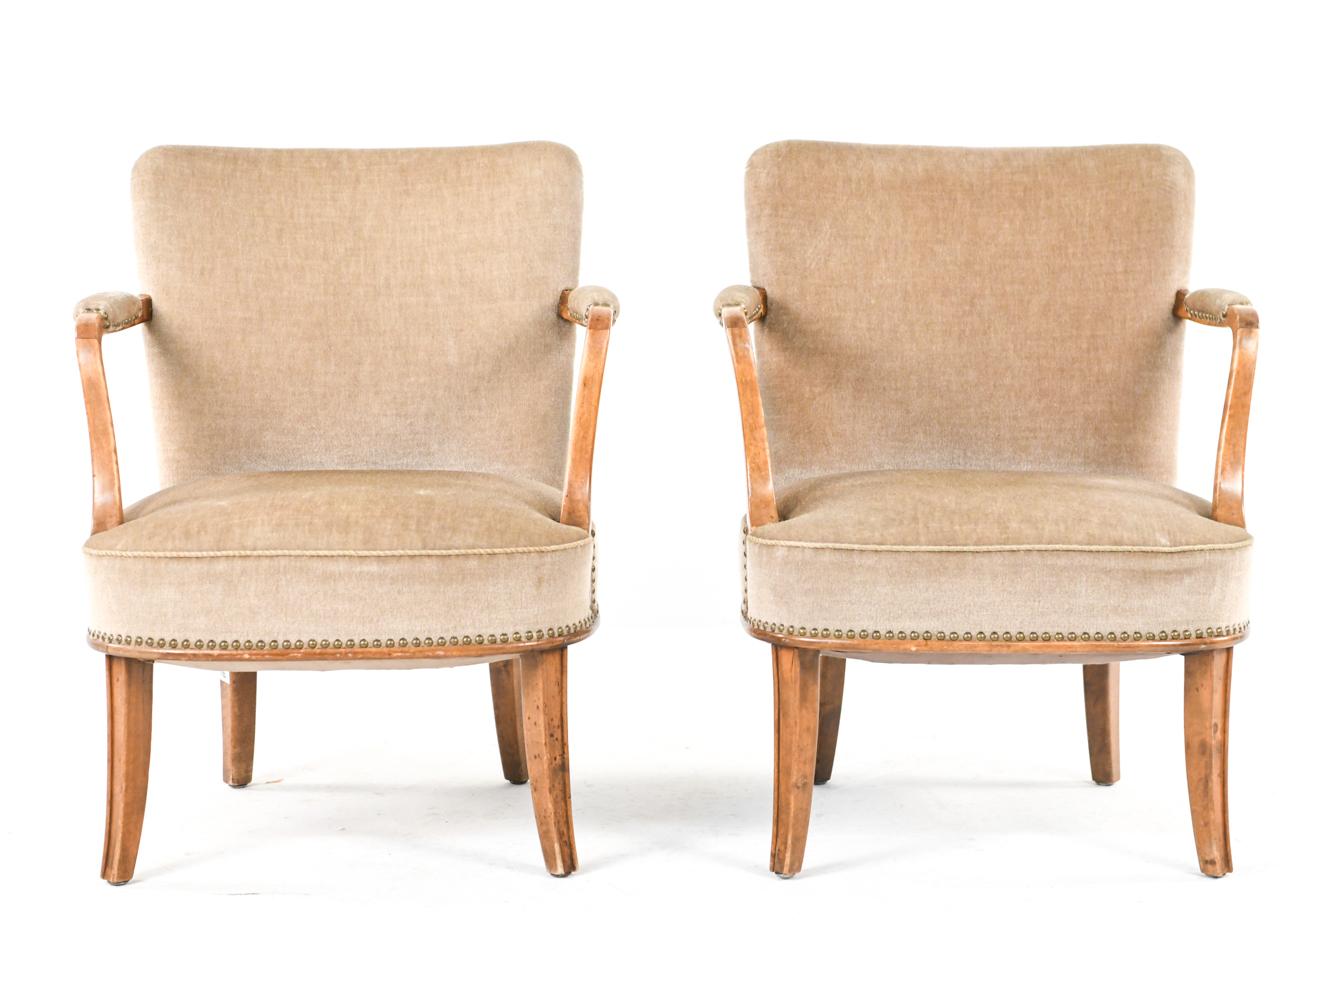 A pair of Swedish mid-century easy chairs in the manner of Carl Malmsten. Upholstered in beige mohair, these chairs feature a nailhead trim detail.